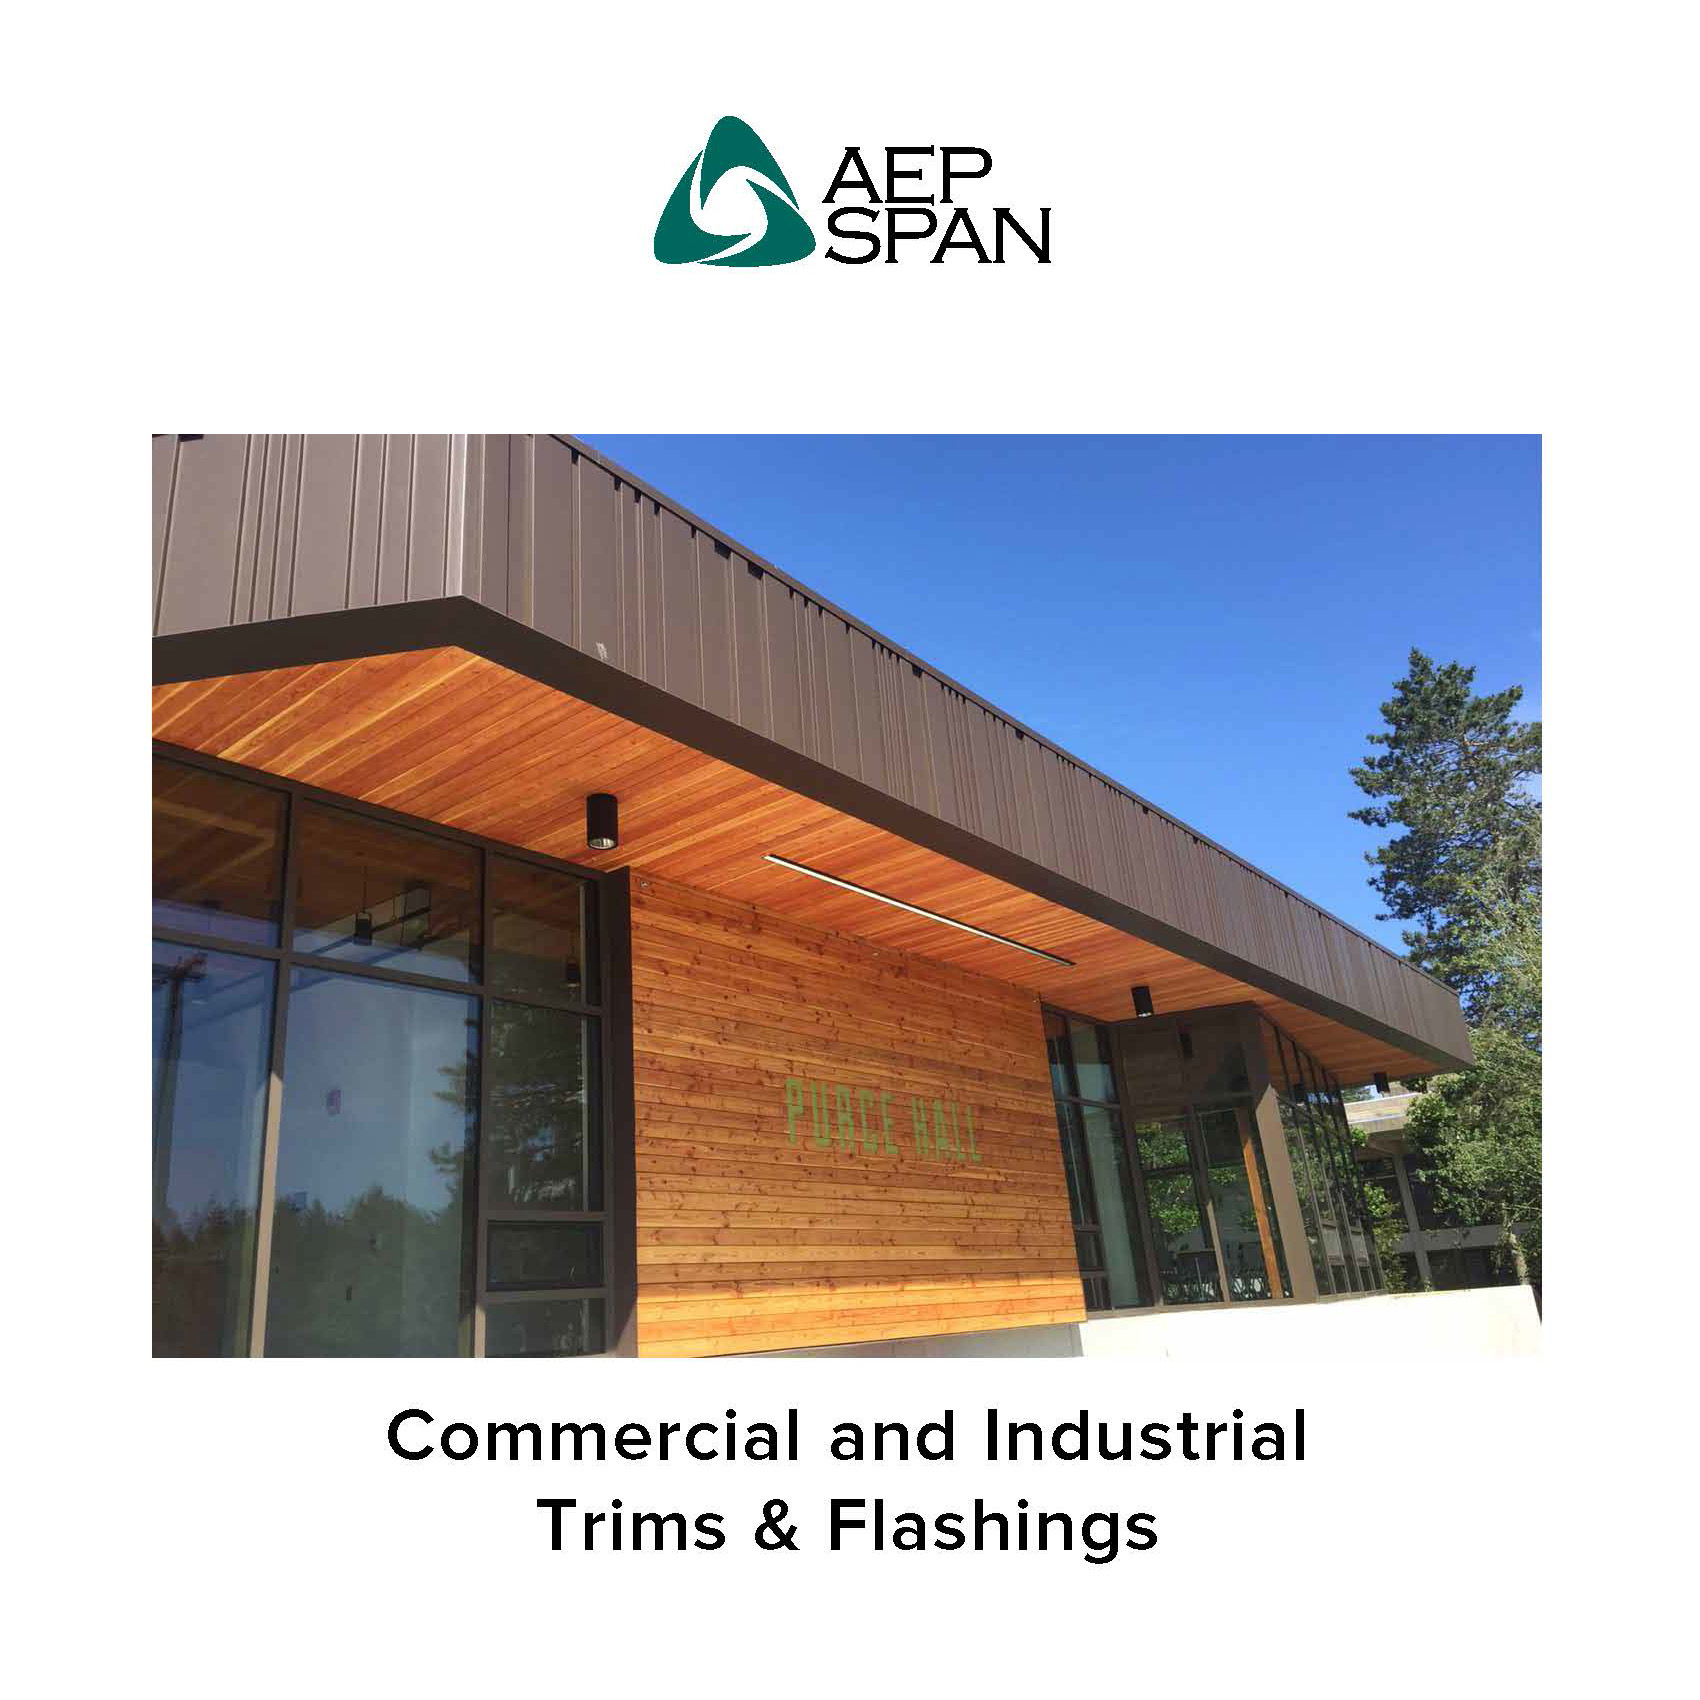 Trims, Flashings & Accessories by AEP Span